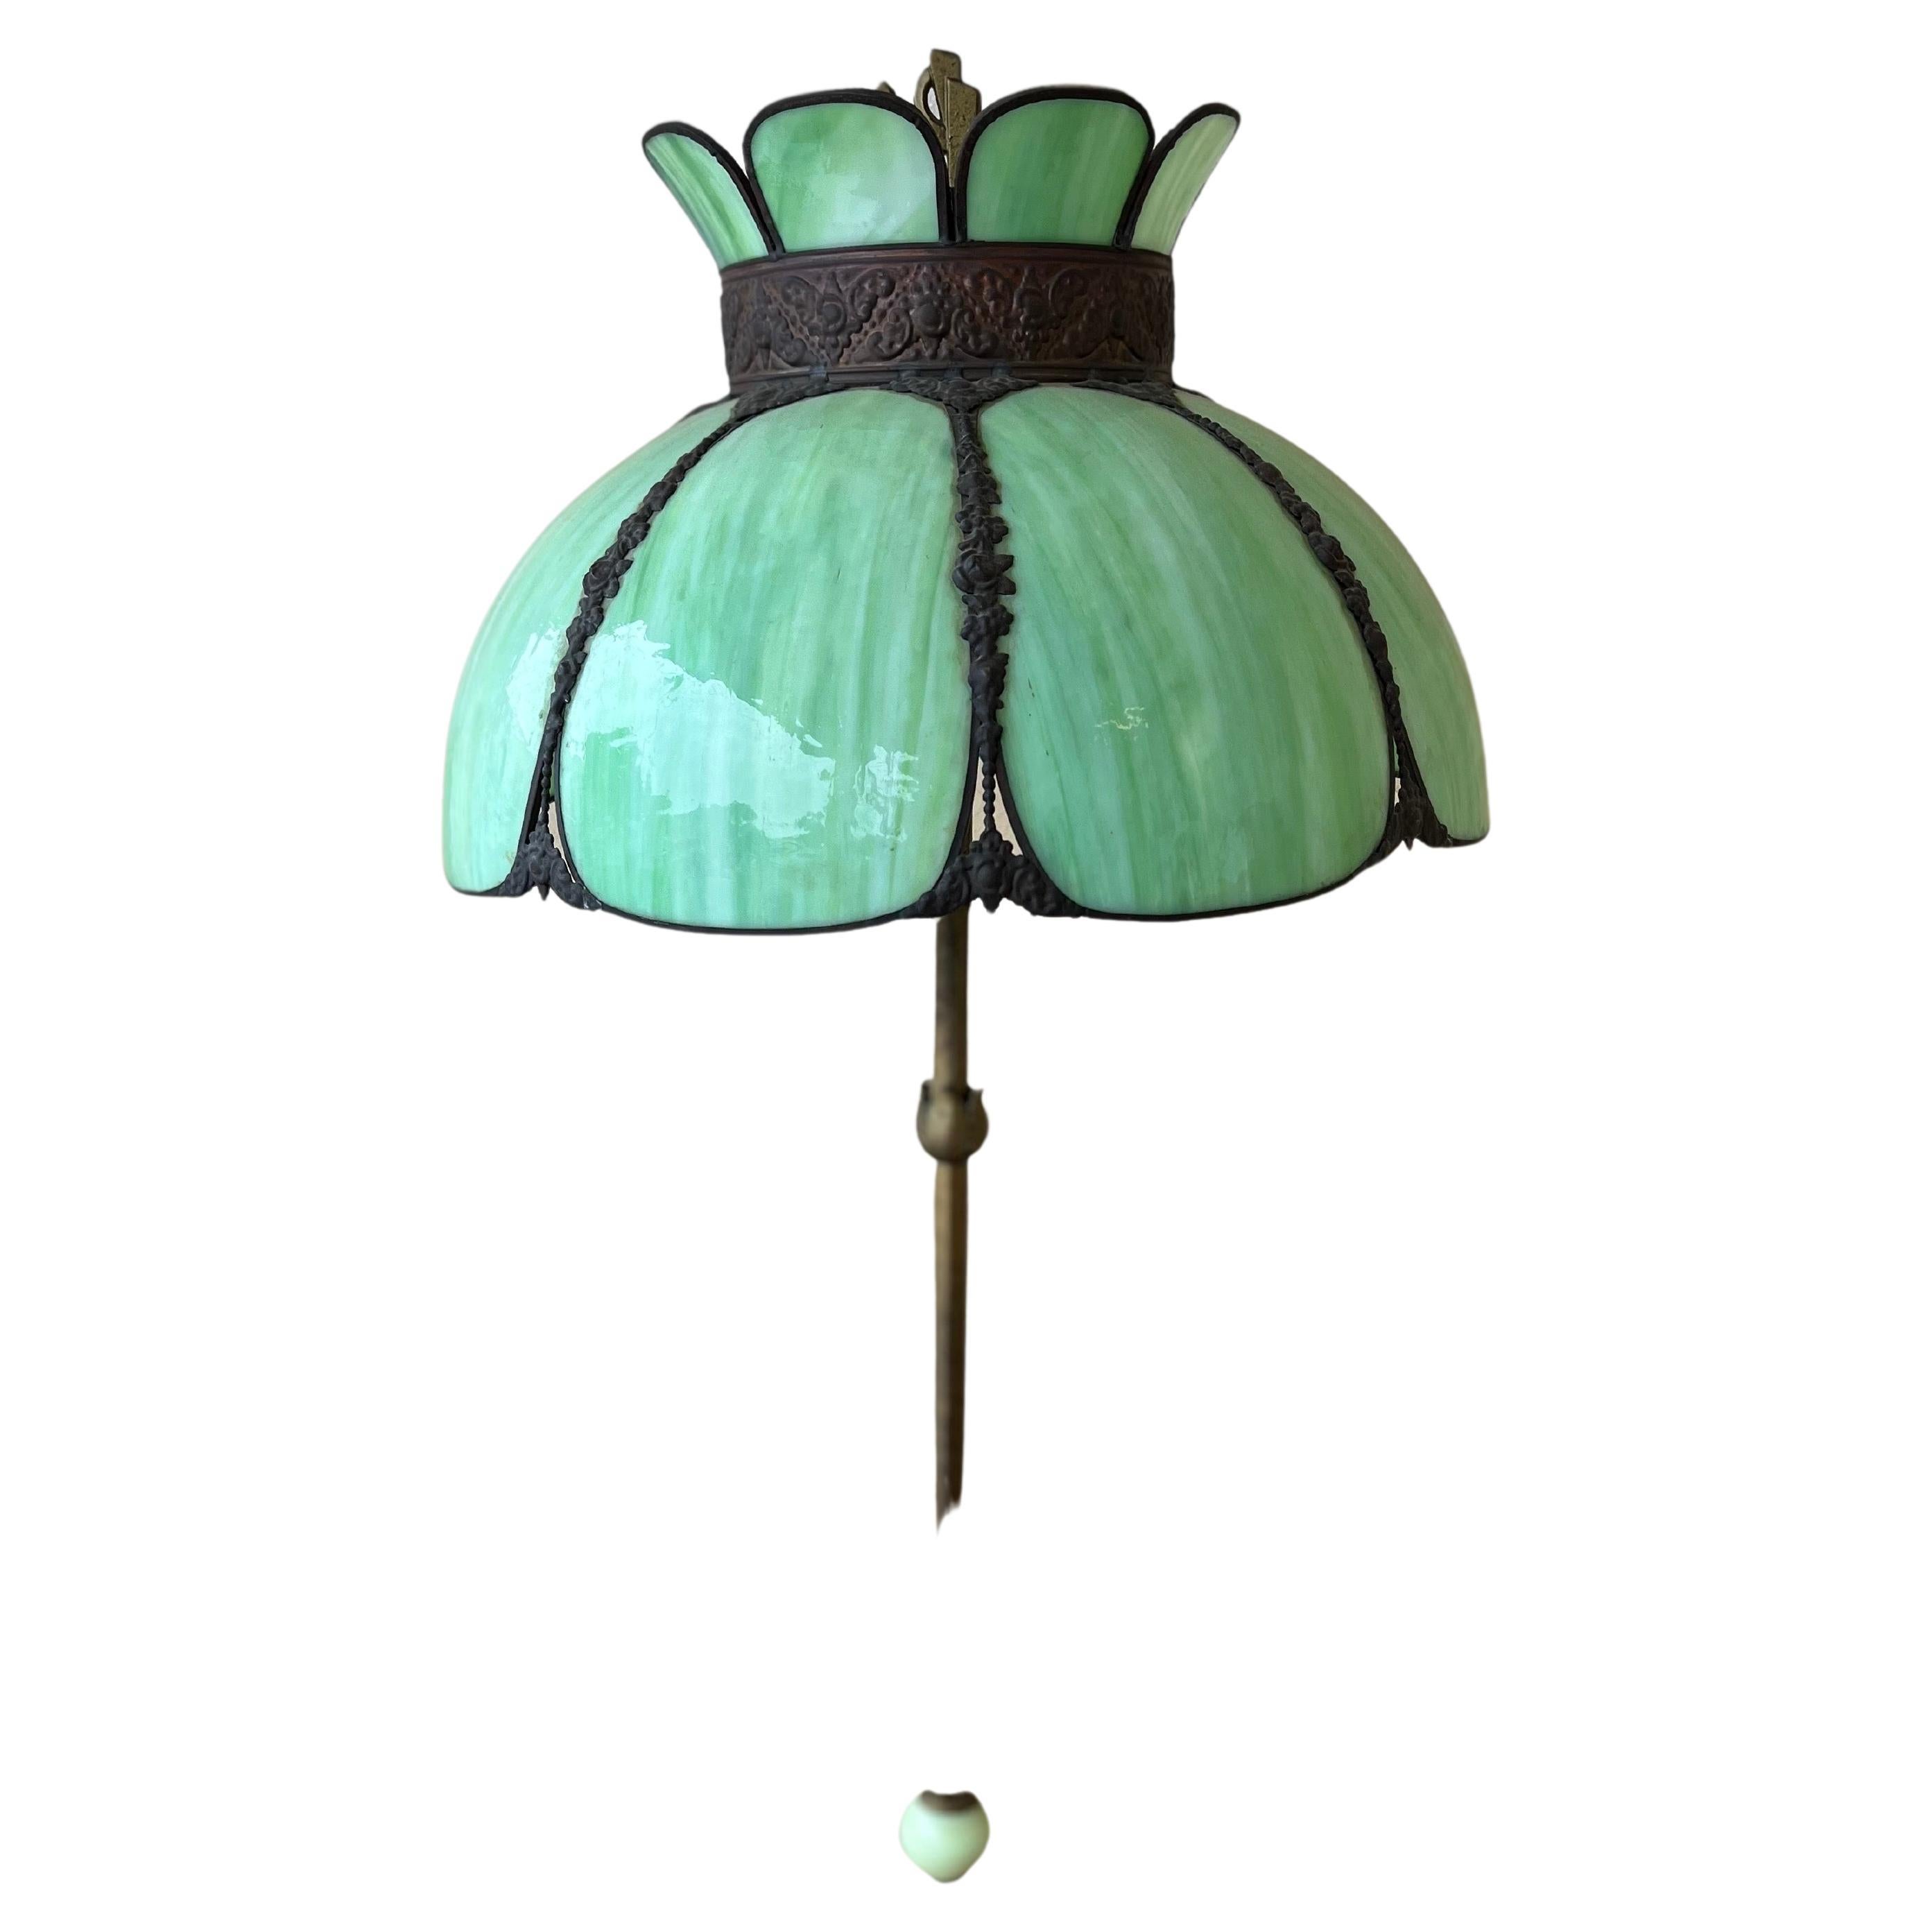 A beautiful rare art Deco floor lamp freshly rewired, original stained jadeite glass, new gold cloth cord, painted metal base with guild accents, circa the 1920s, 


